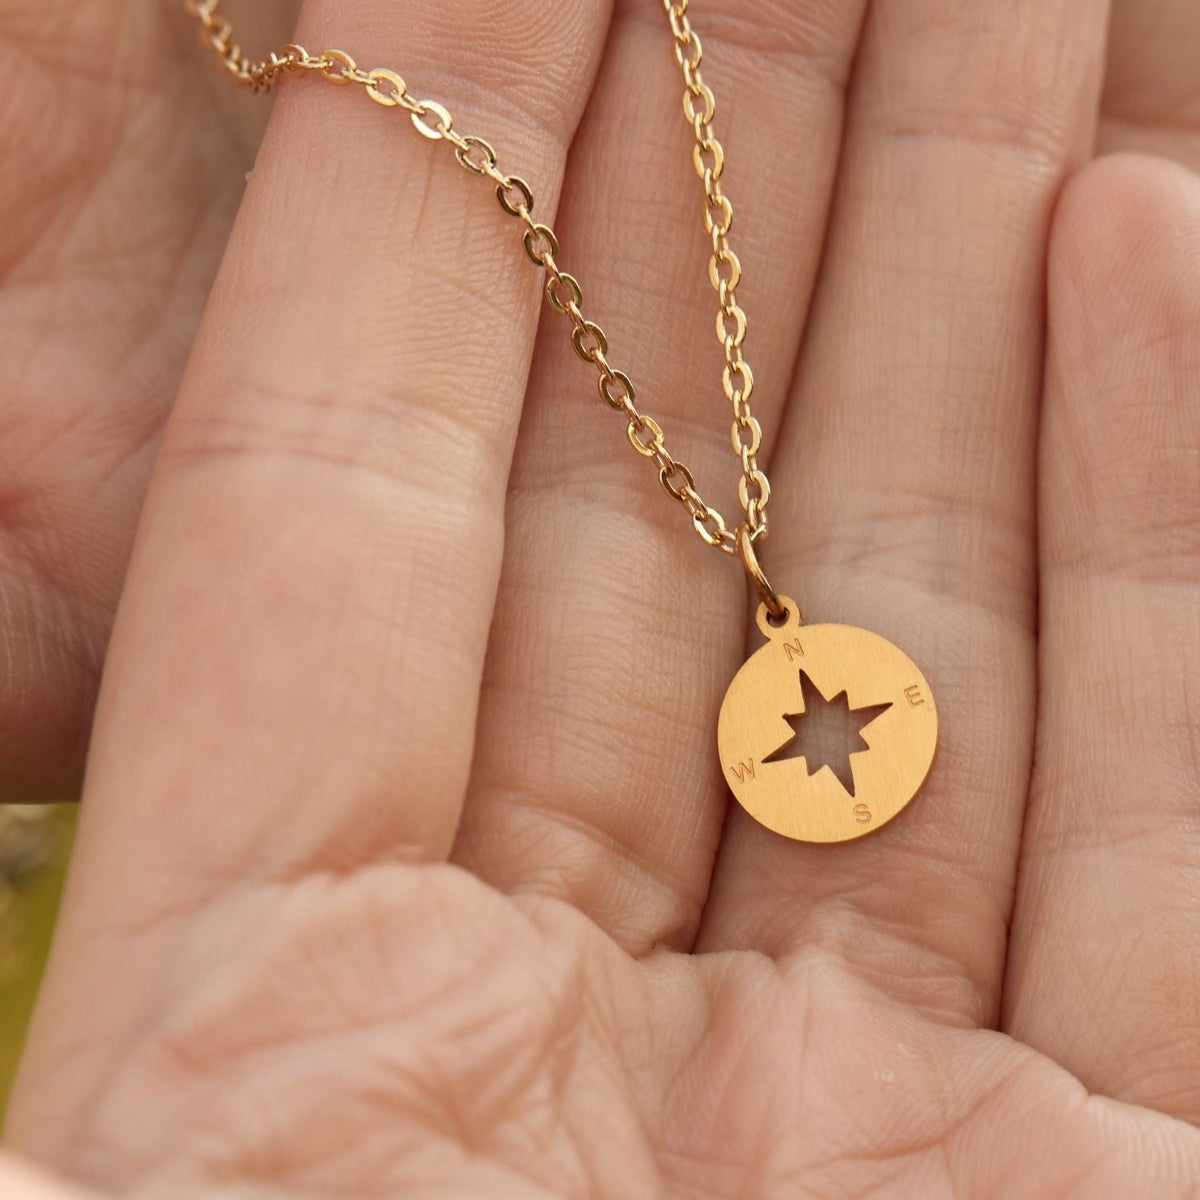 To My Beautiful Bonus Daughter | Gift of Life | Compass Necklace